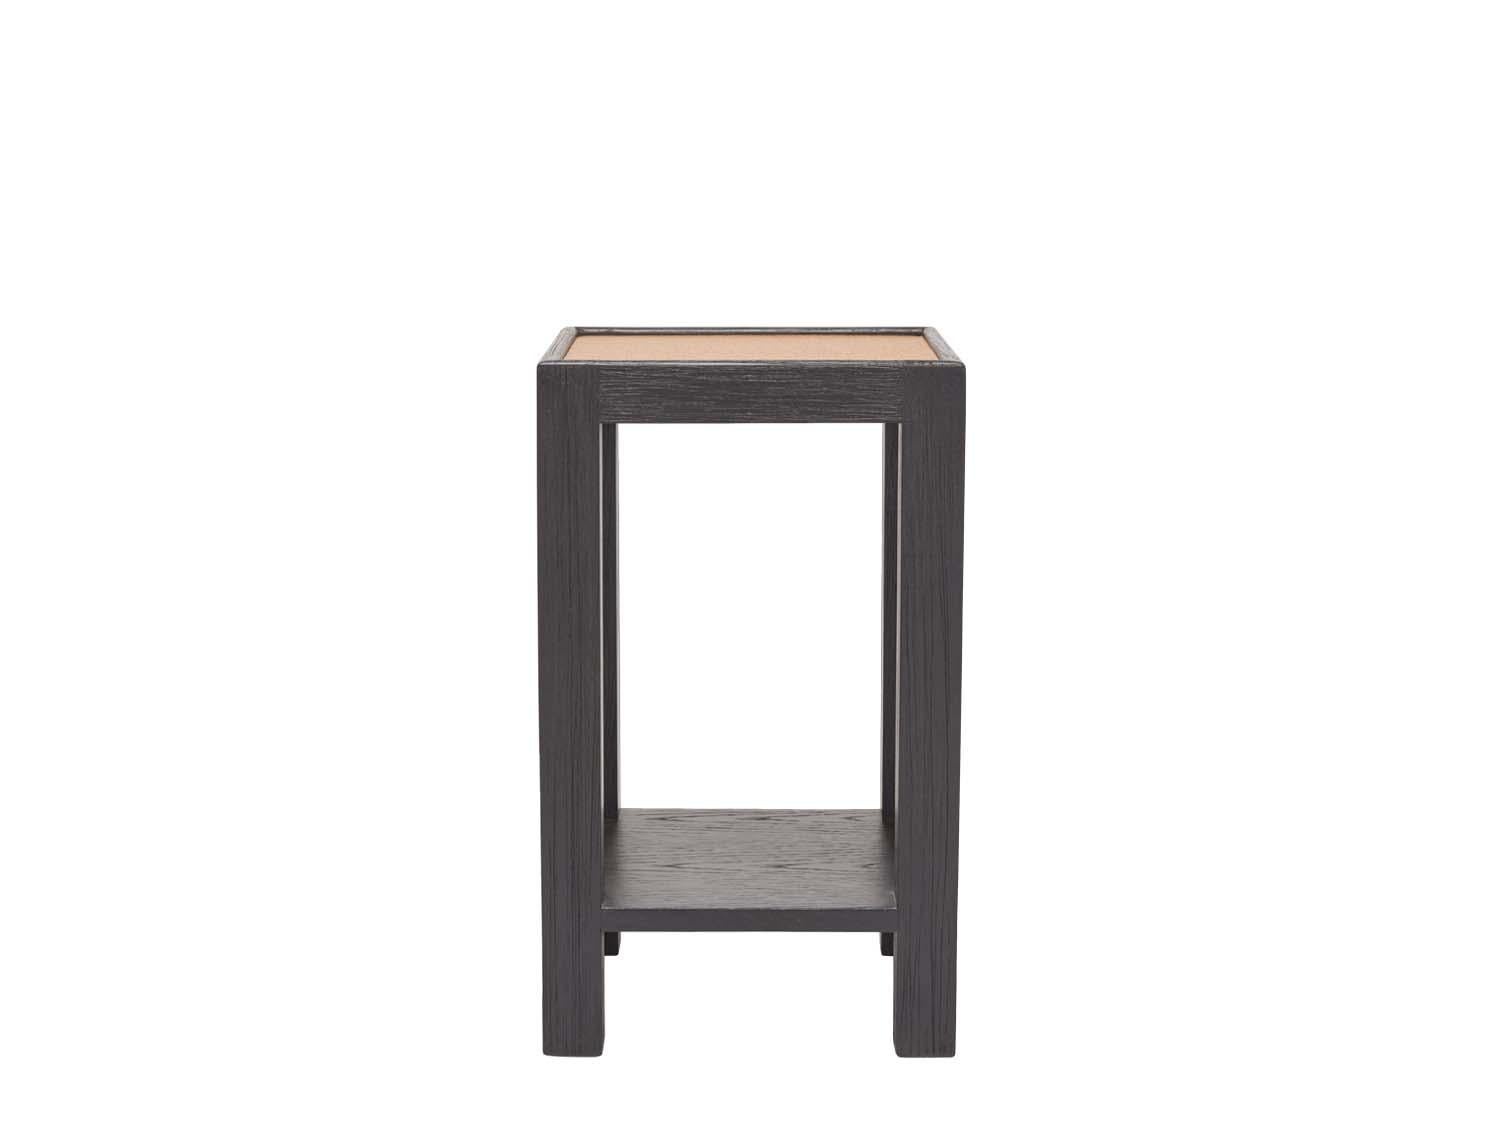 The narrow side table is made of solid American walnut or white oak and features a lower shelf and your choice of a cork or bronze mirror top. 

The Lawson-Fenning Collection is designed and handmade in Los Angeles, California. Reach out to